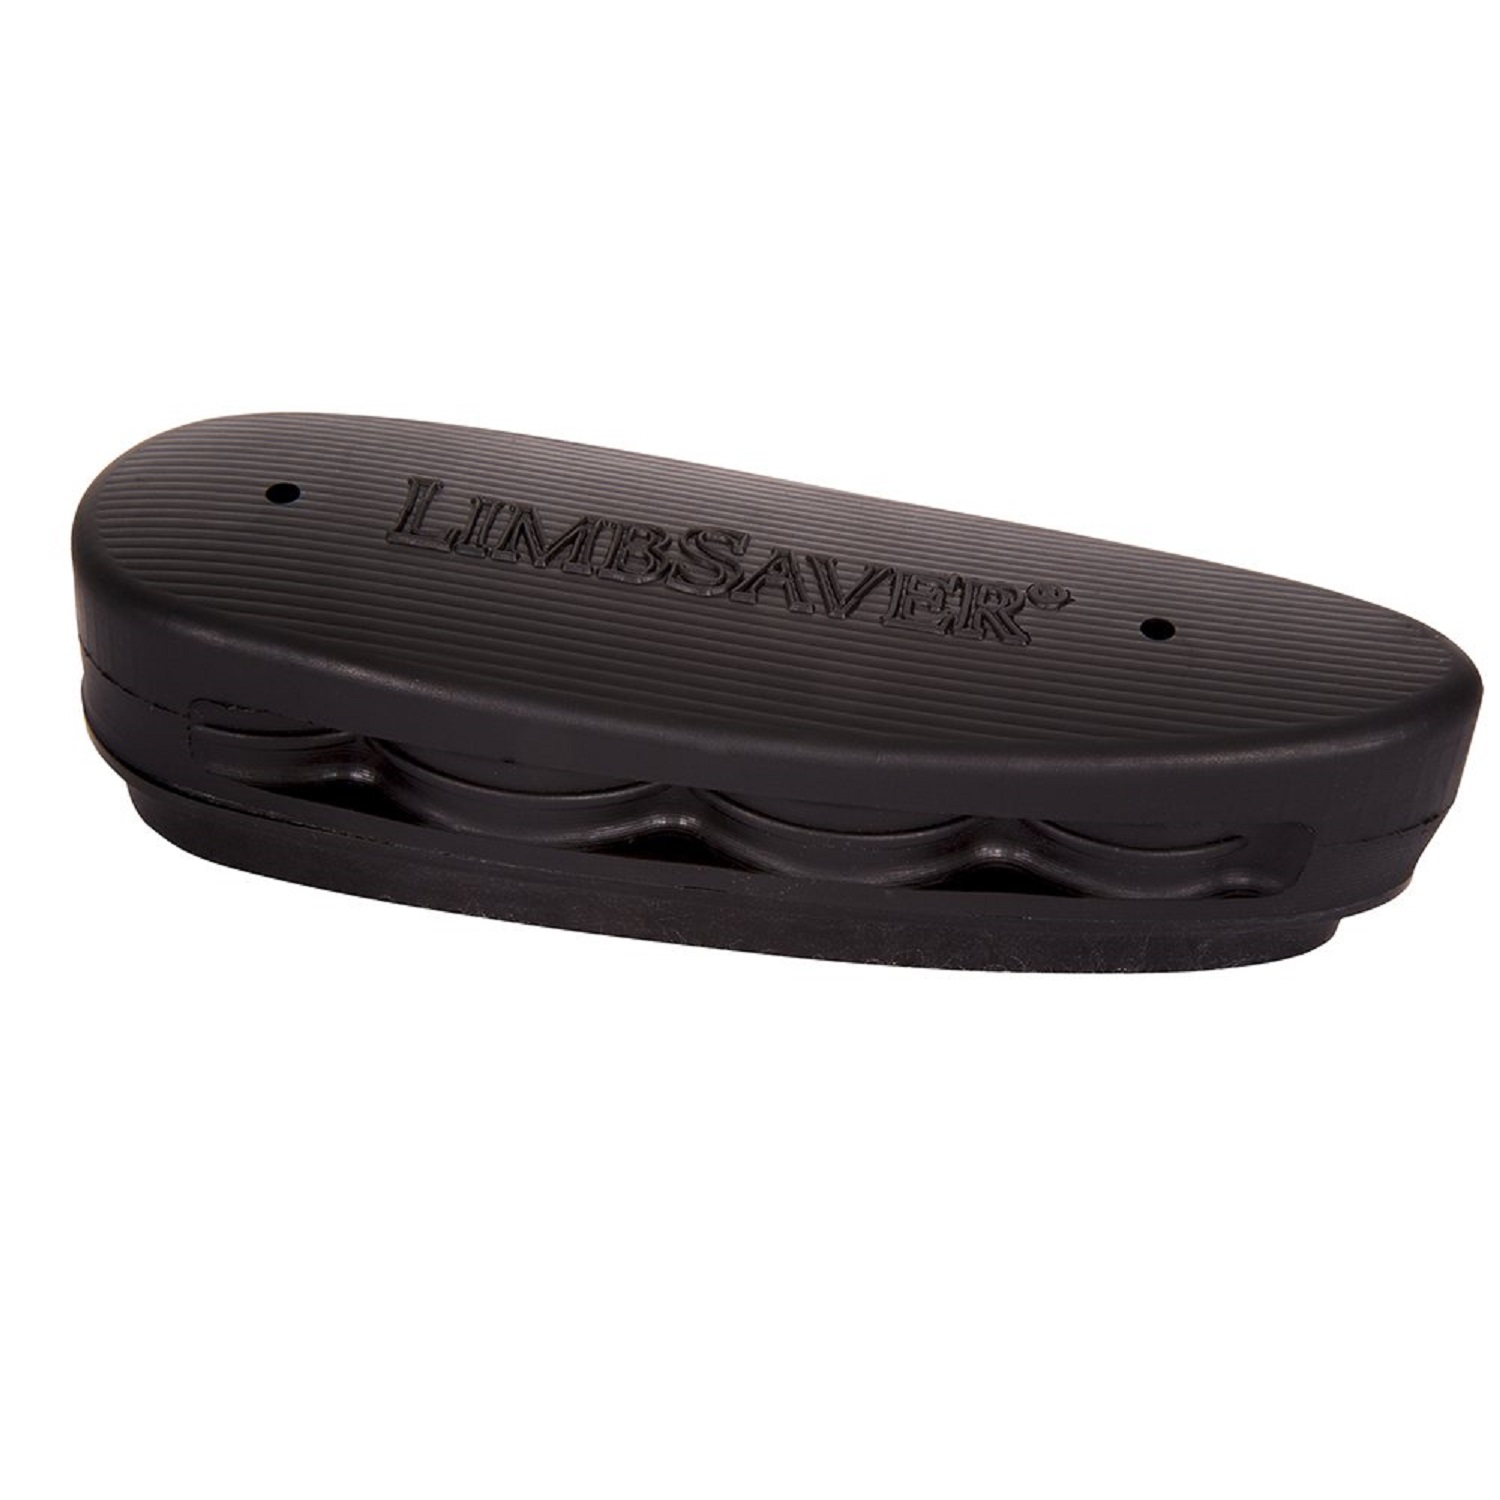 LimbSaver AirTech Precision-Fit Recoil Pad for Wood Stocks